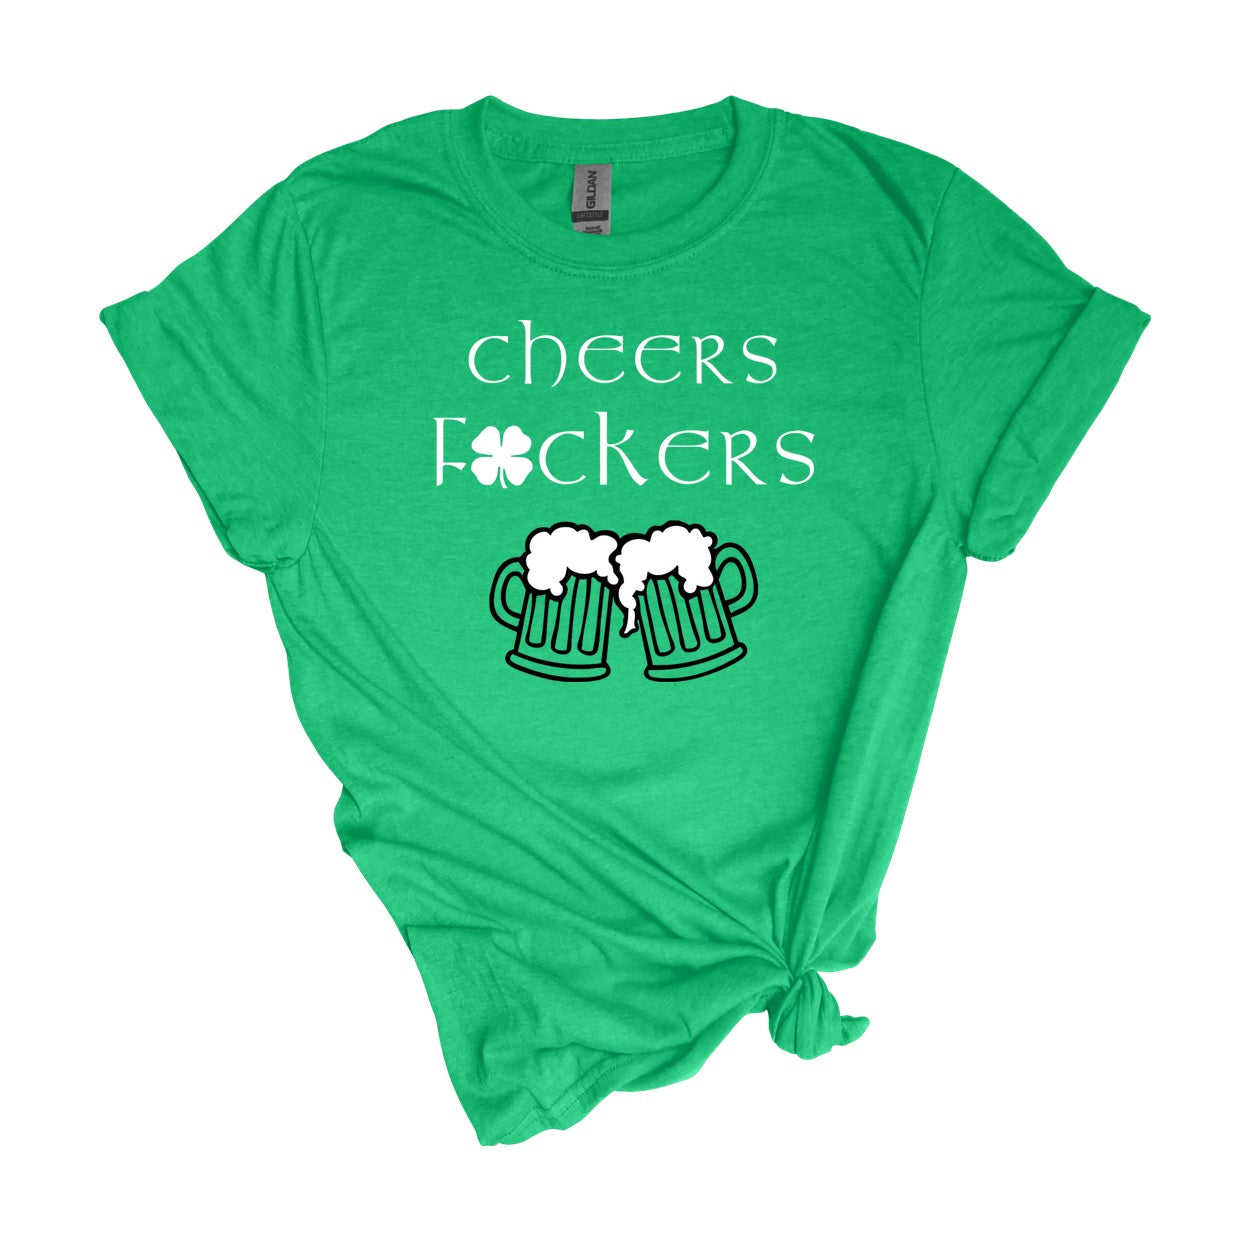 Cheers F**ckers St. Patrick's Day Adult Unisex Soft Tee